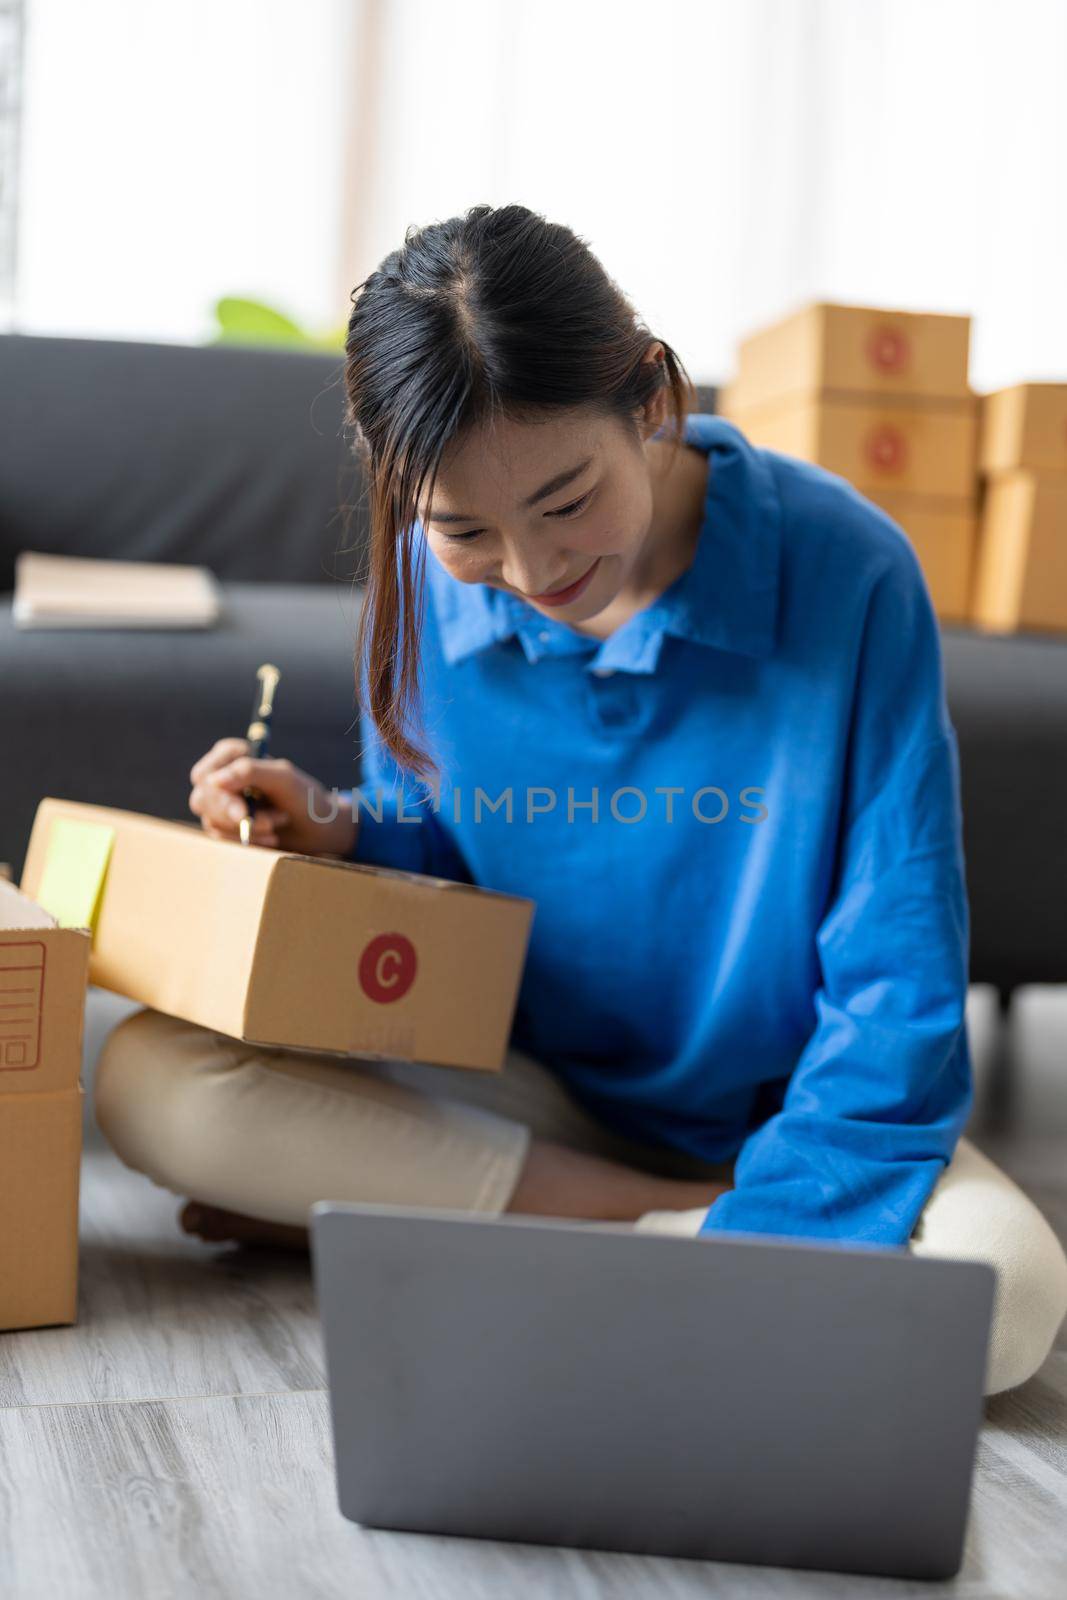 Shipping shopping online, startup small business owner writing address on cardboard box at workplace. Freelance Asian woman small business entrepreneur SME working with box at home.